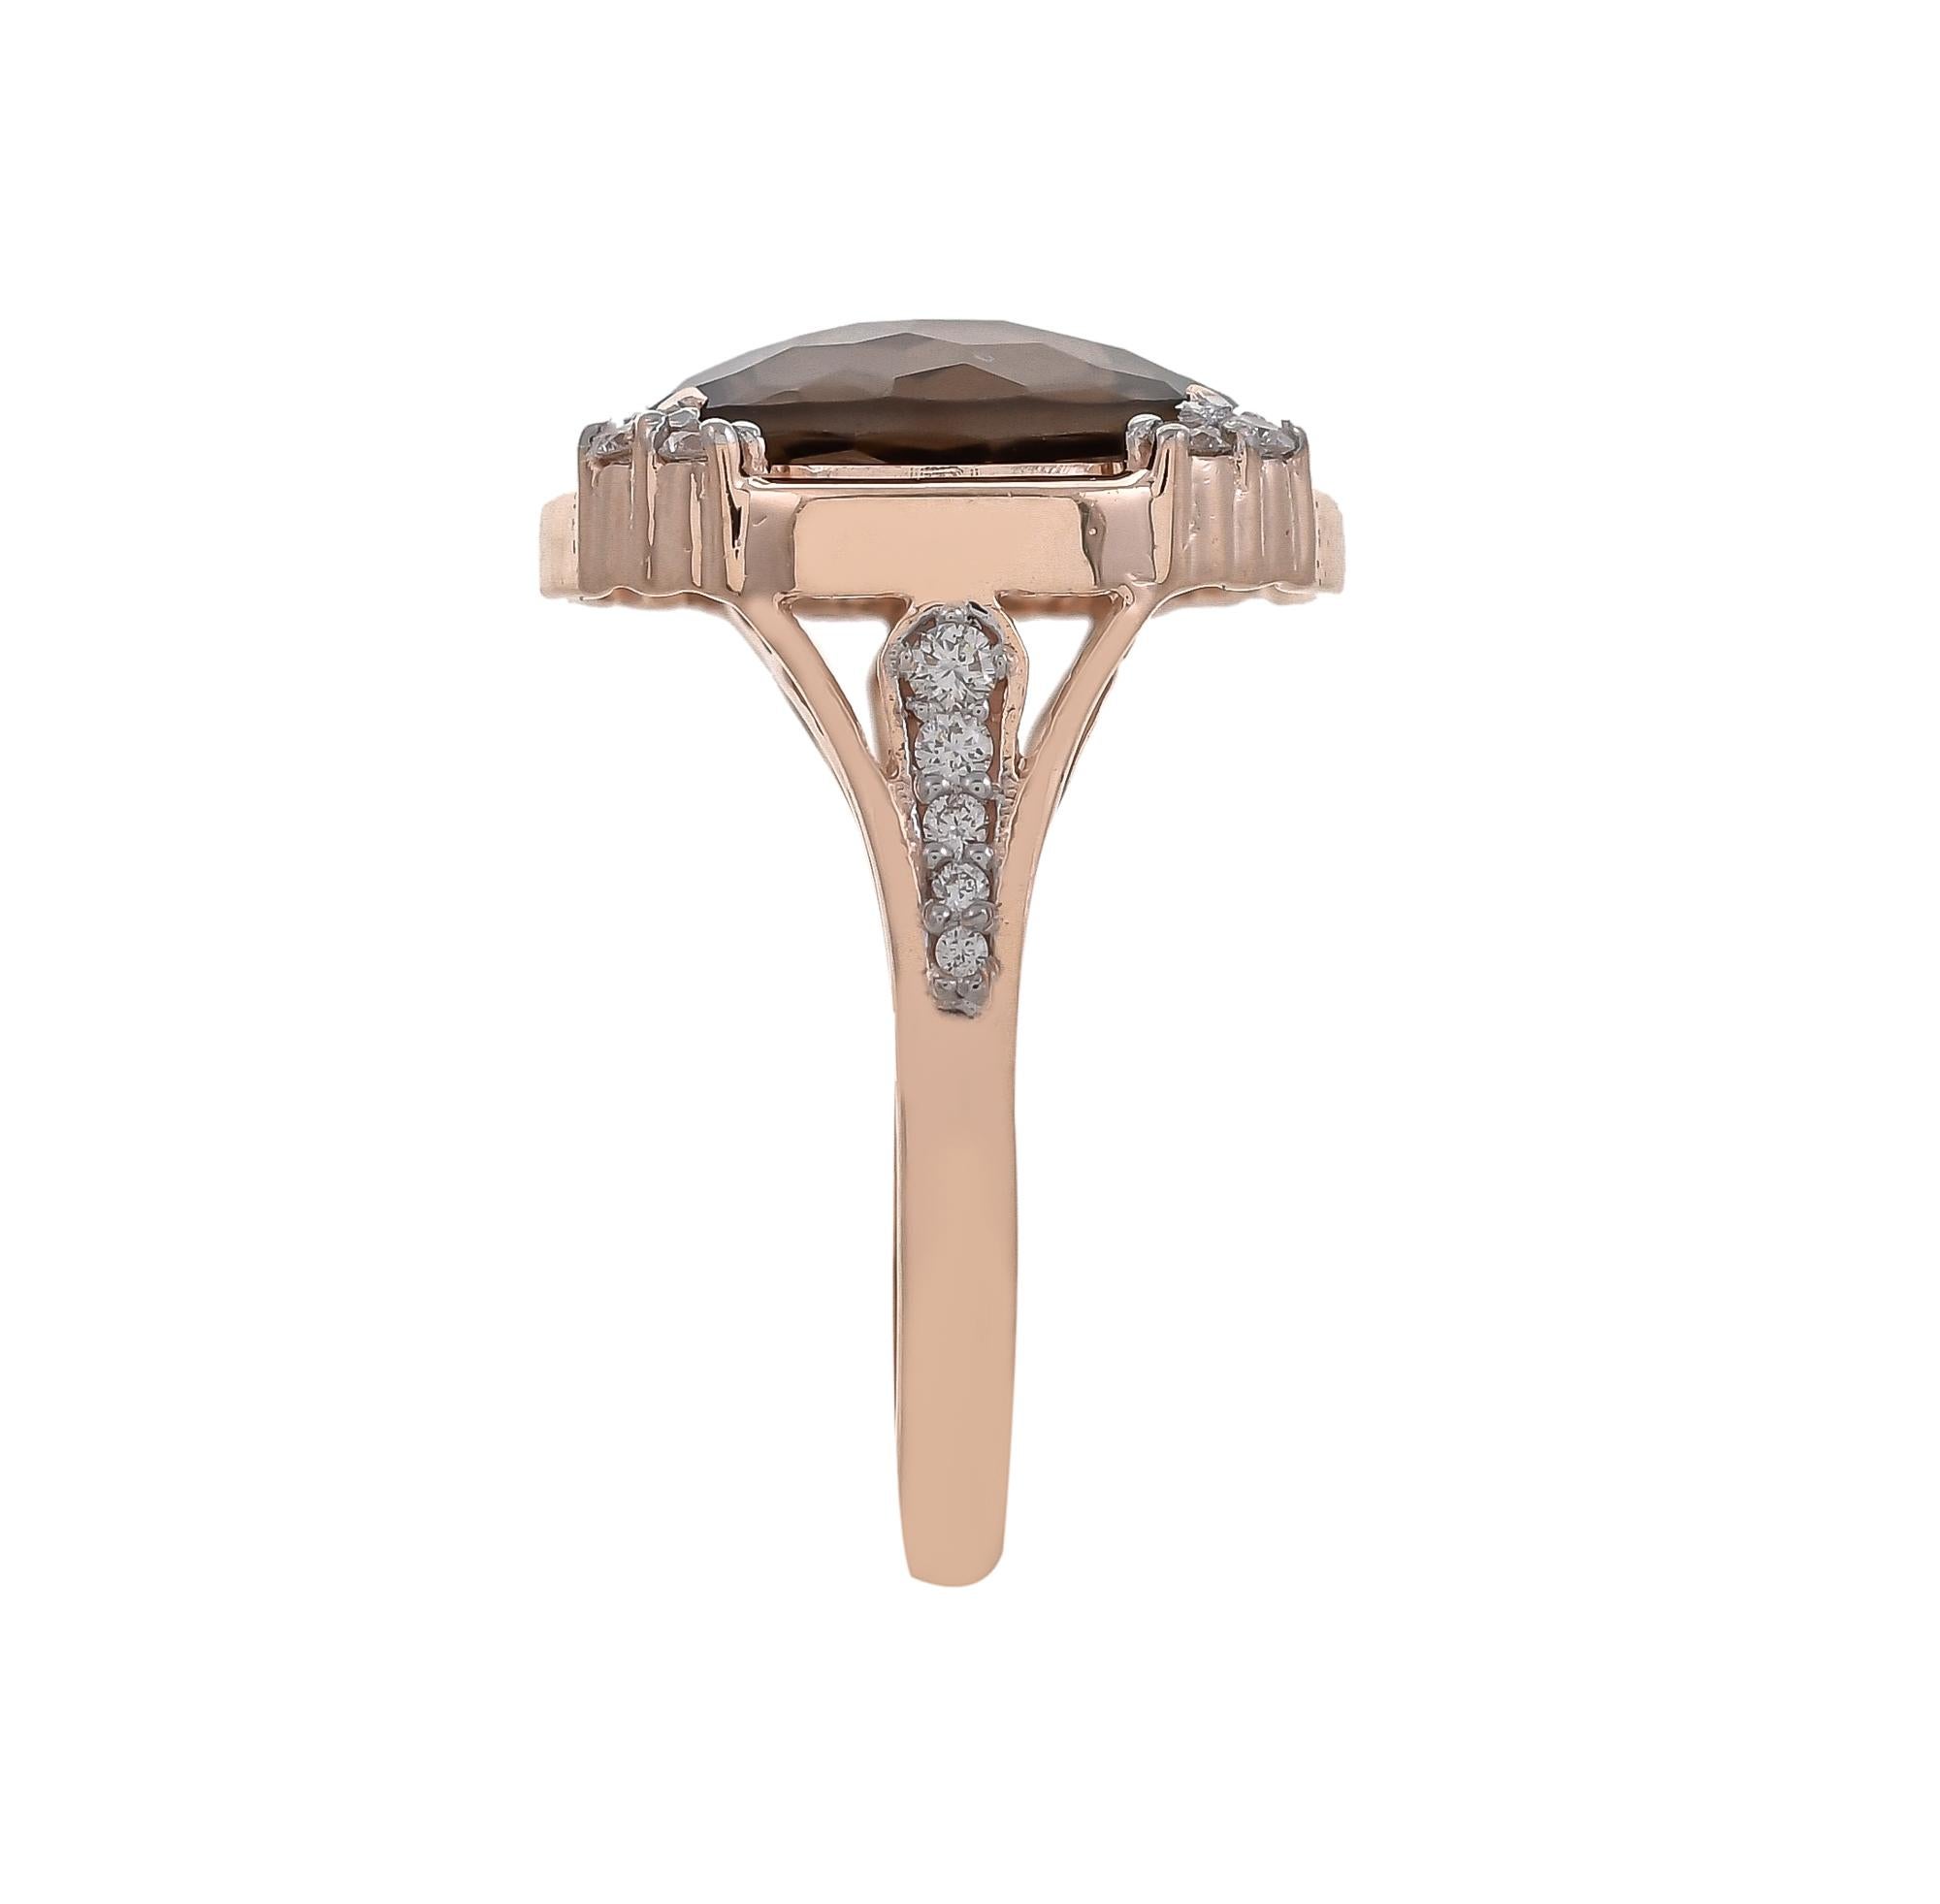 Centring on oval-shaped smoky quartz weighing approximately 5.21 carats, set on four sides with round shaped diamonds to a diamond set and openwork shoulders with a total diamond weight of approximately 0.34 carats, mounted in 18 karats rose gold.